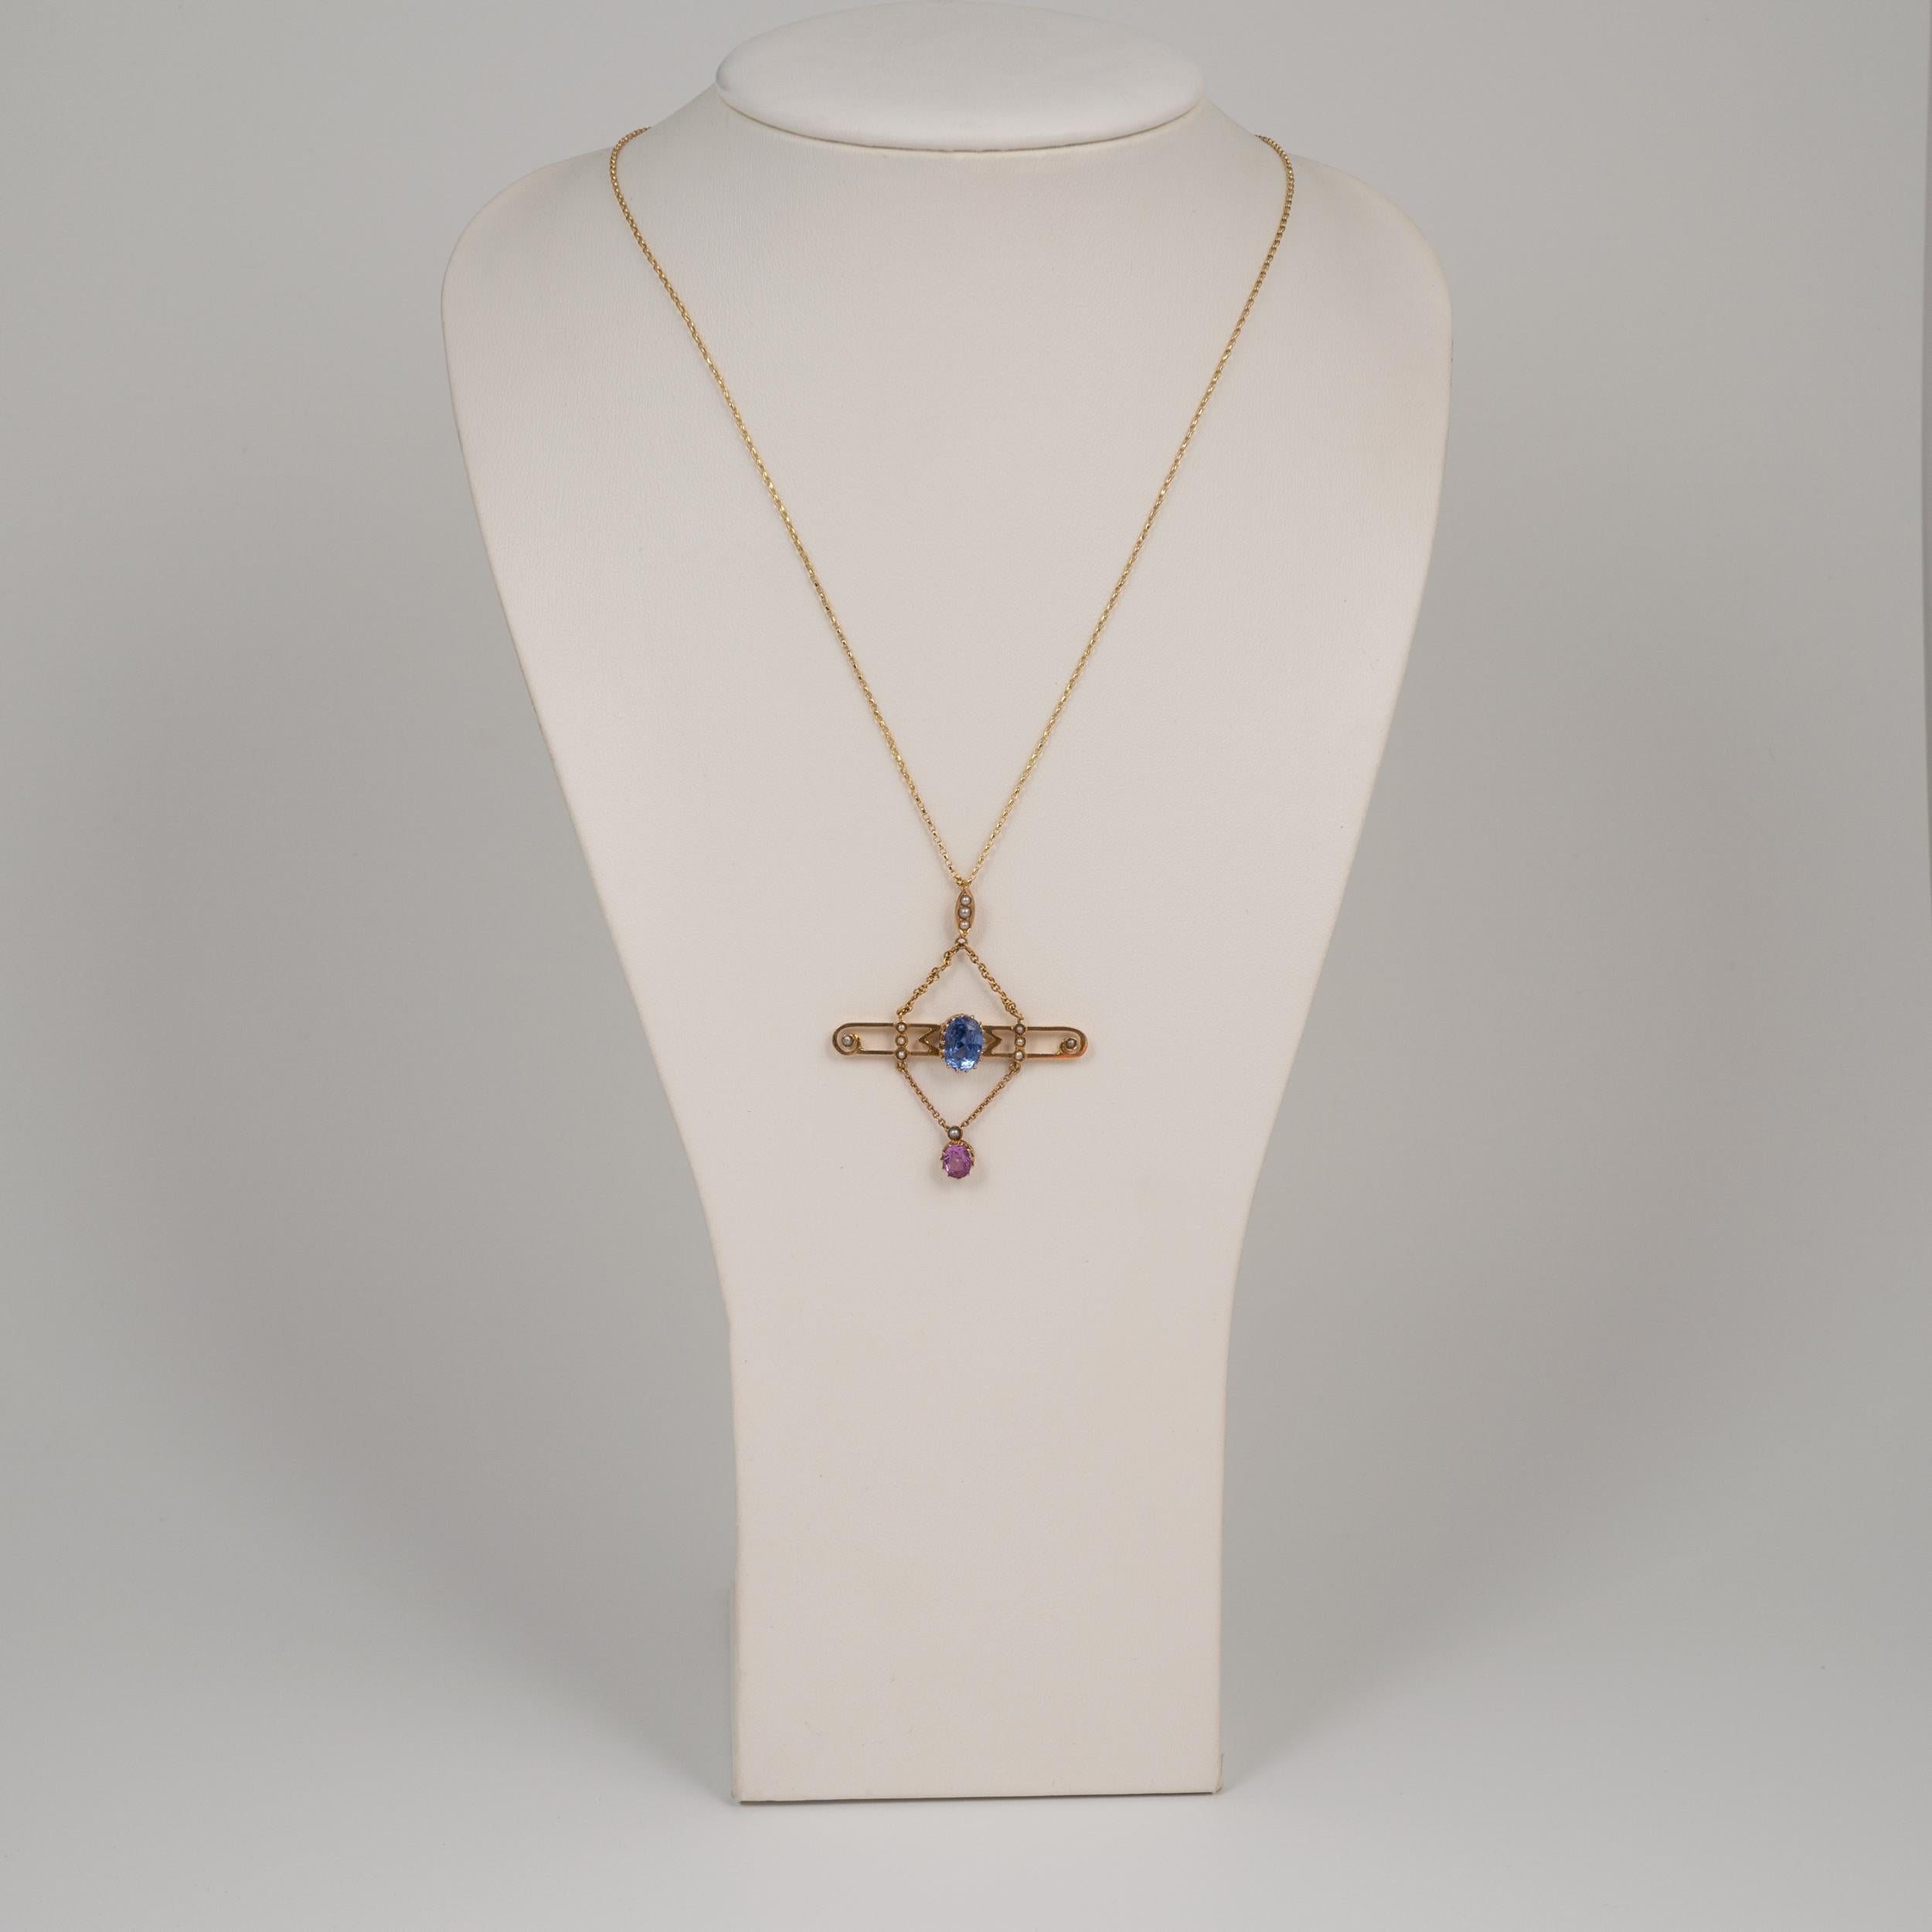 The most exquisite antique sapphire pendant necklace, 15-carat yellow gold, complete with complimentary lightweight 9ct gold belcher chain.

This gorgeous Art Nouveau statement piece is set with cornflower blue sapphire and pink sapphire drop with